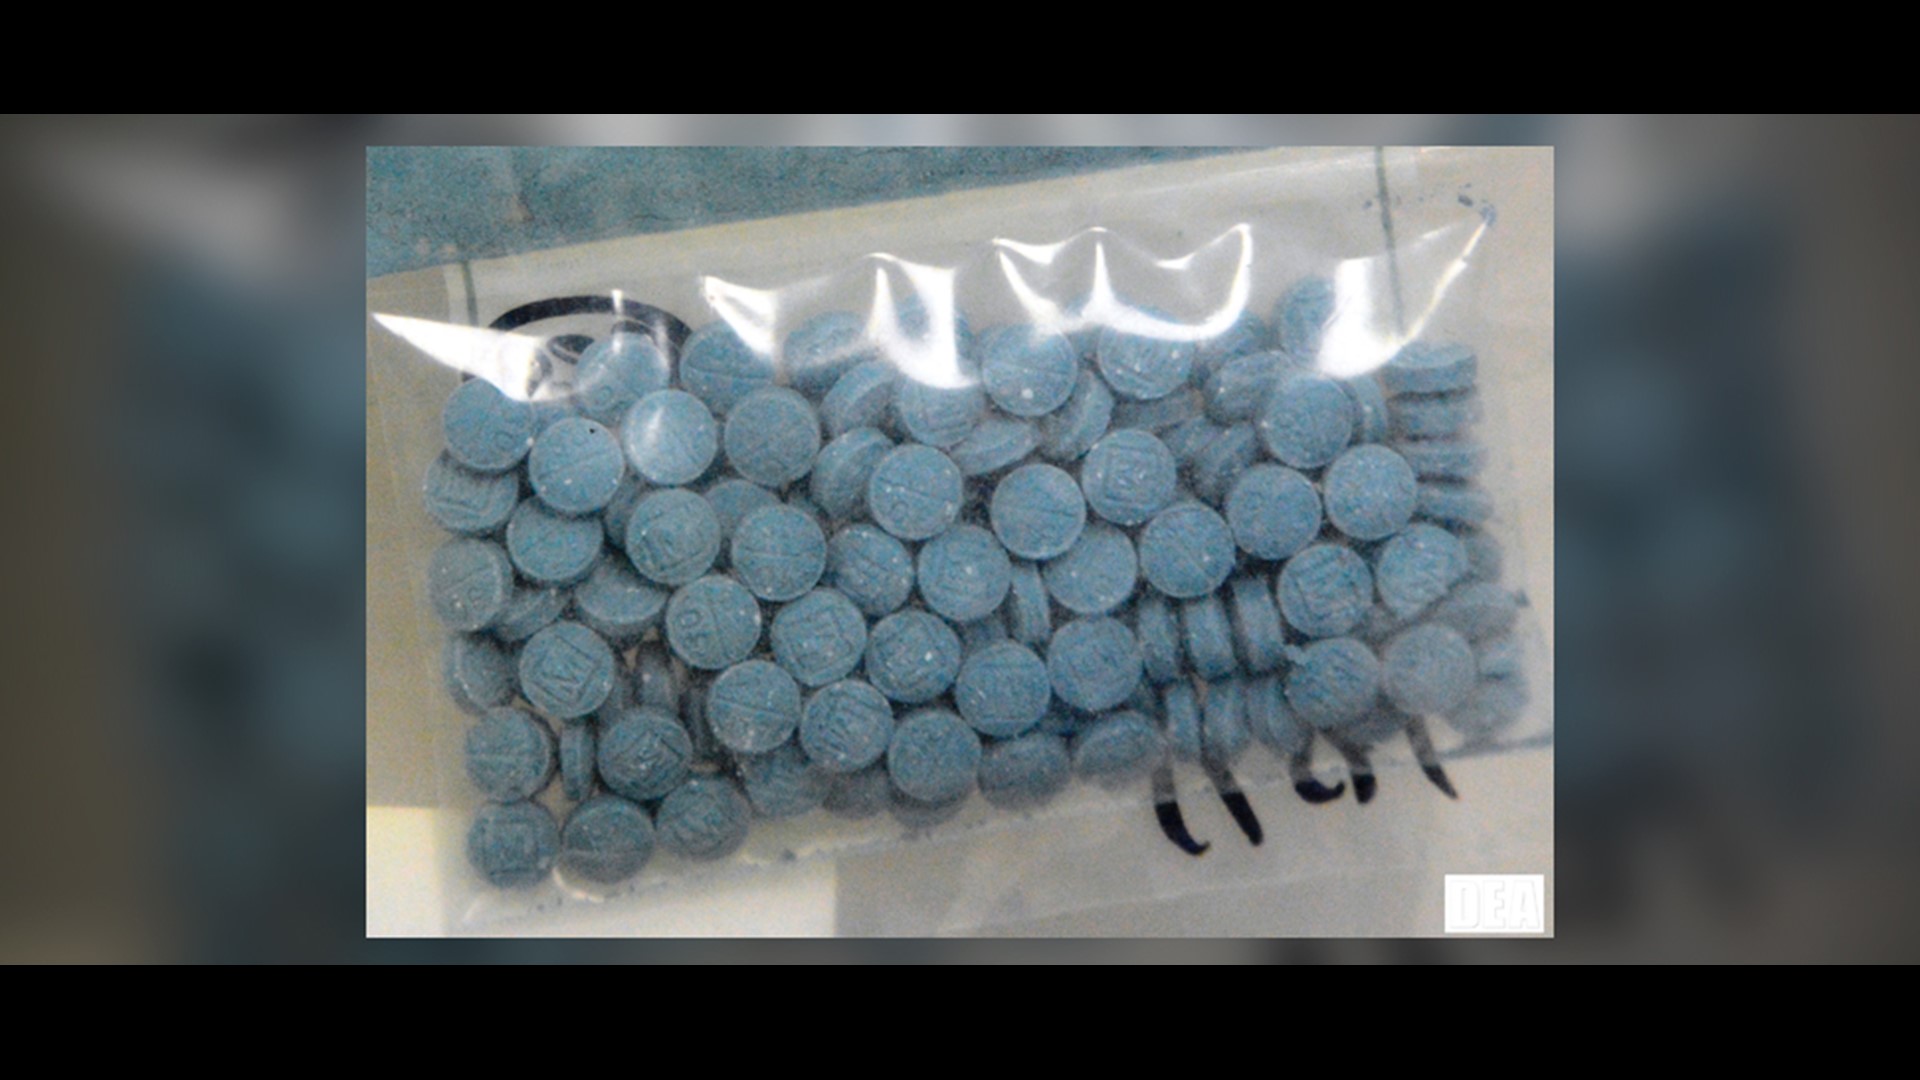 Bartholomew Co. warns of counterfeit drugs containing dangerous levels of fentanyl.